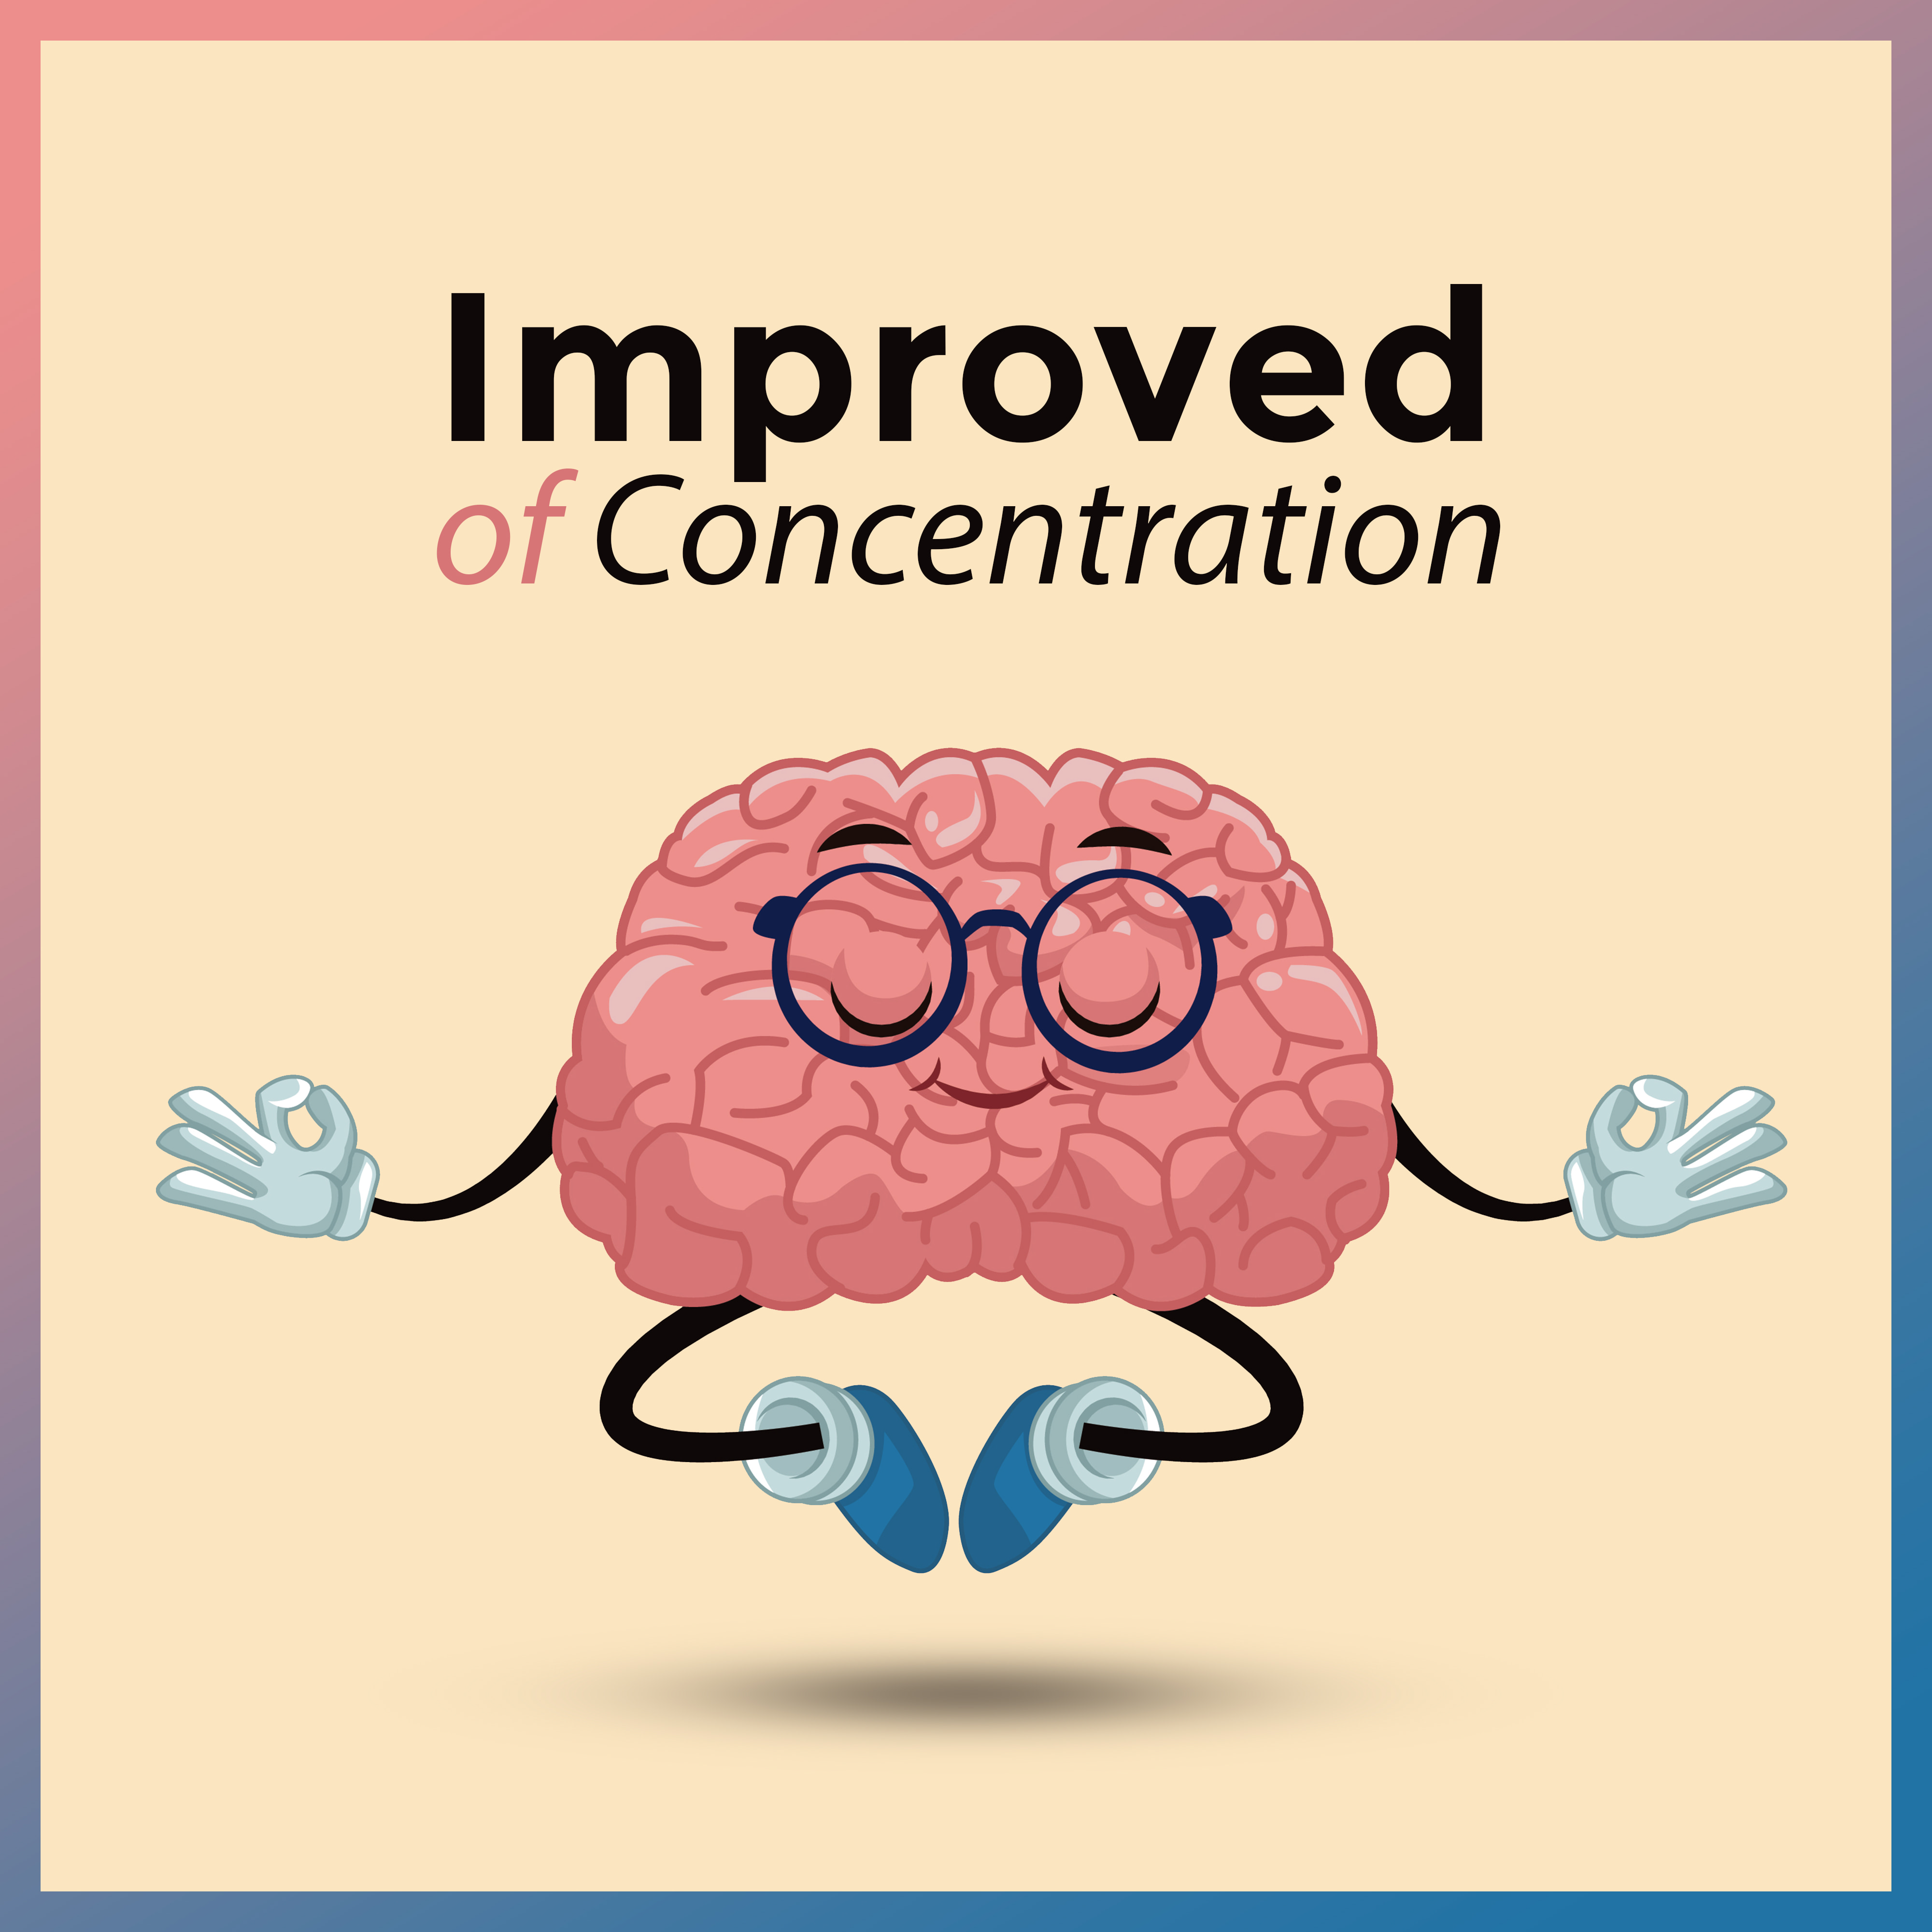 Improved of Concentration: Music Helpful in Learning, Studying, Work requiring Full Concentration and Focus